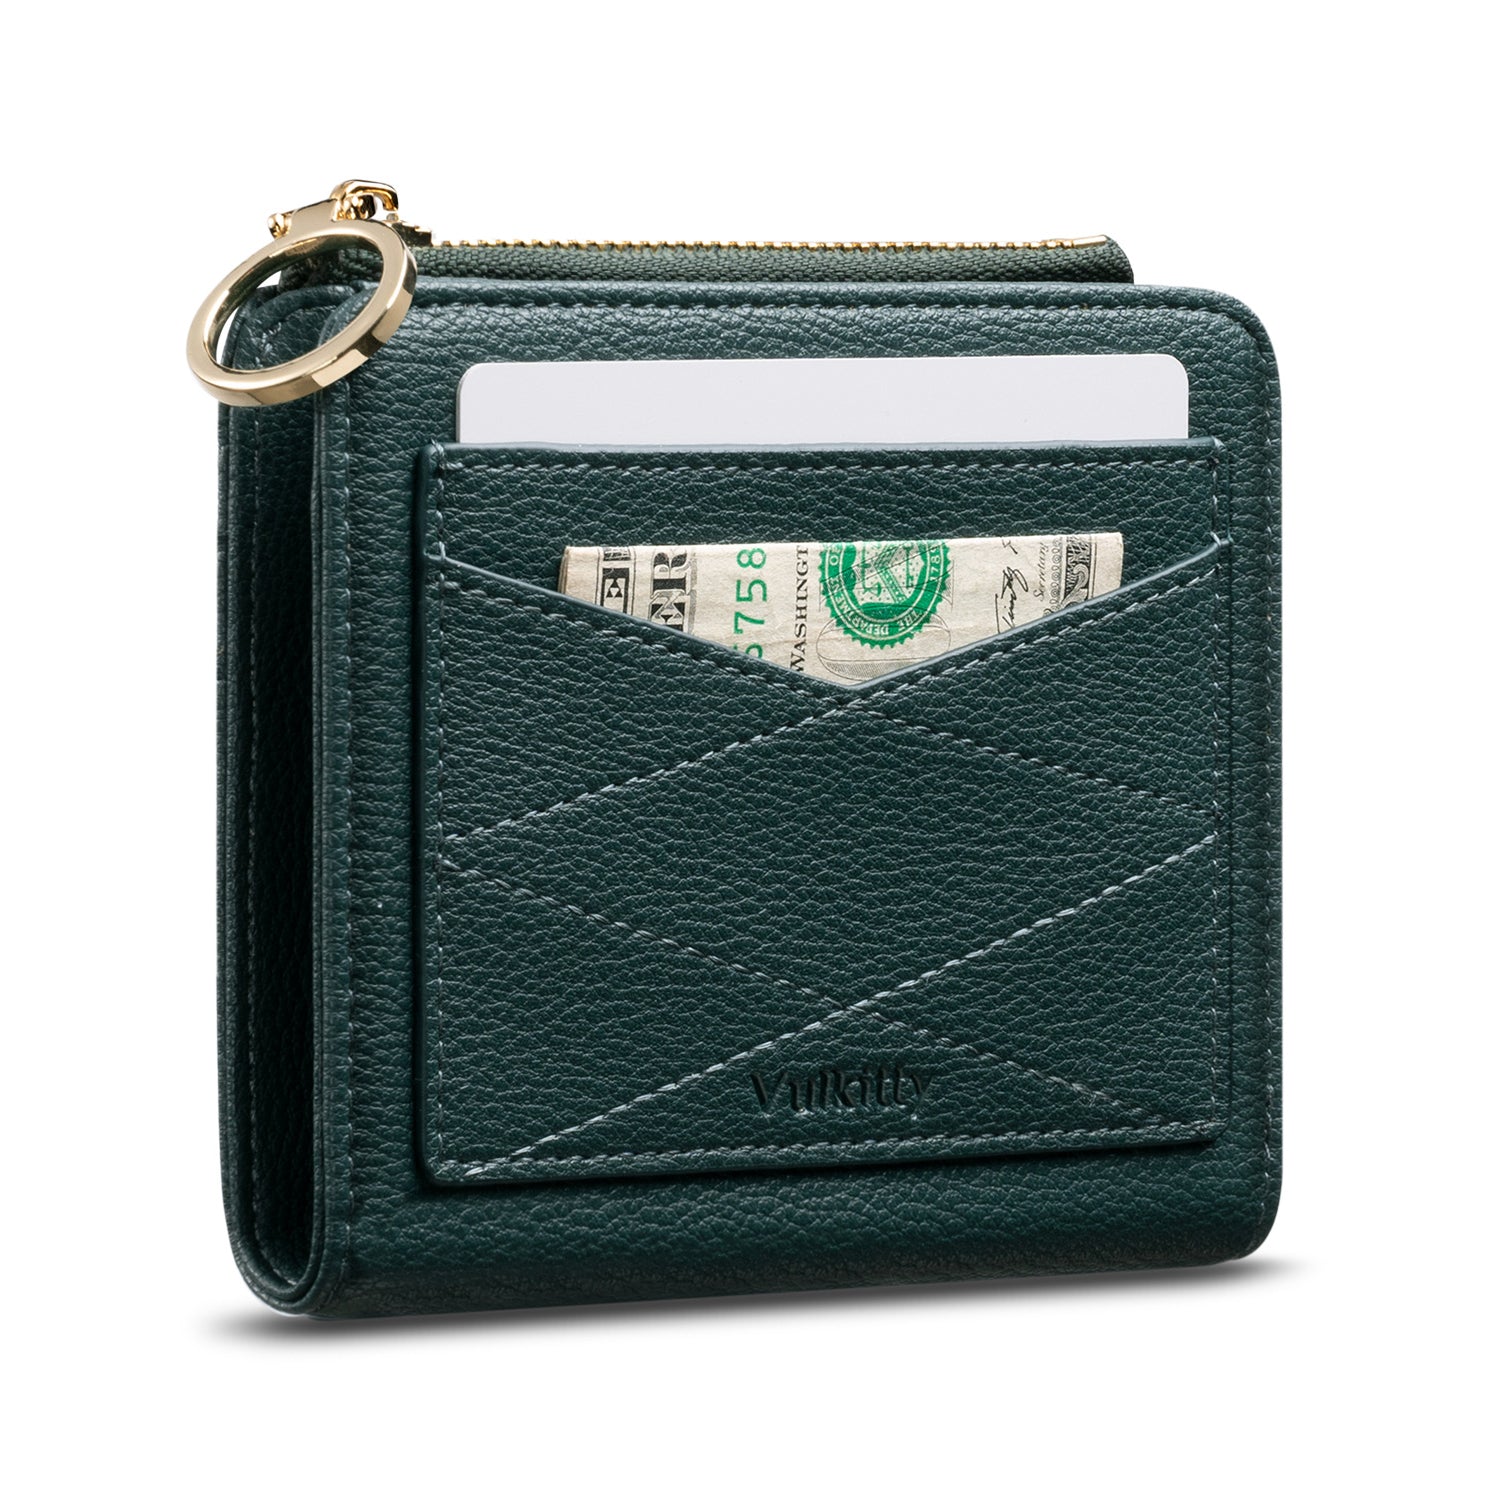 The Ladies Leather Zipper Wallet